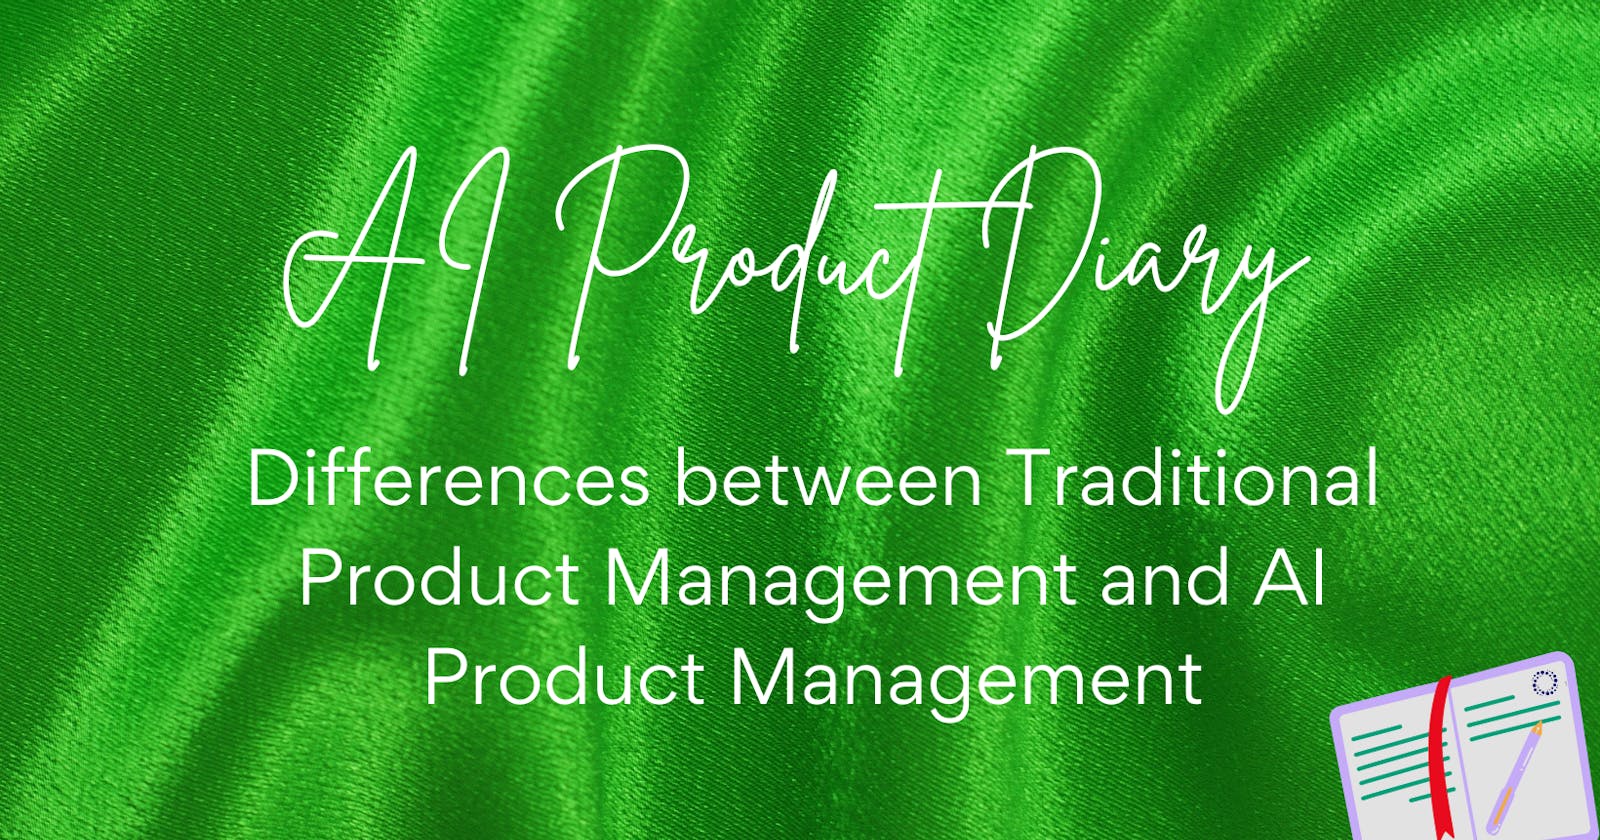 Differences between Traditional Product Management and AI & Data Product Management